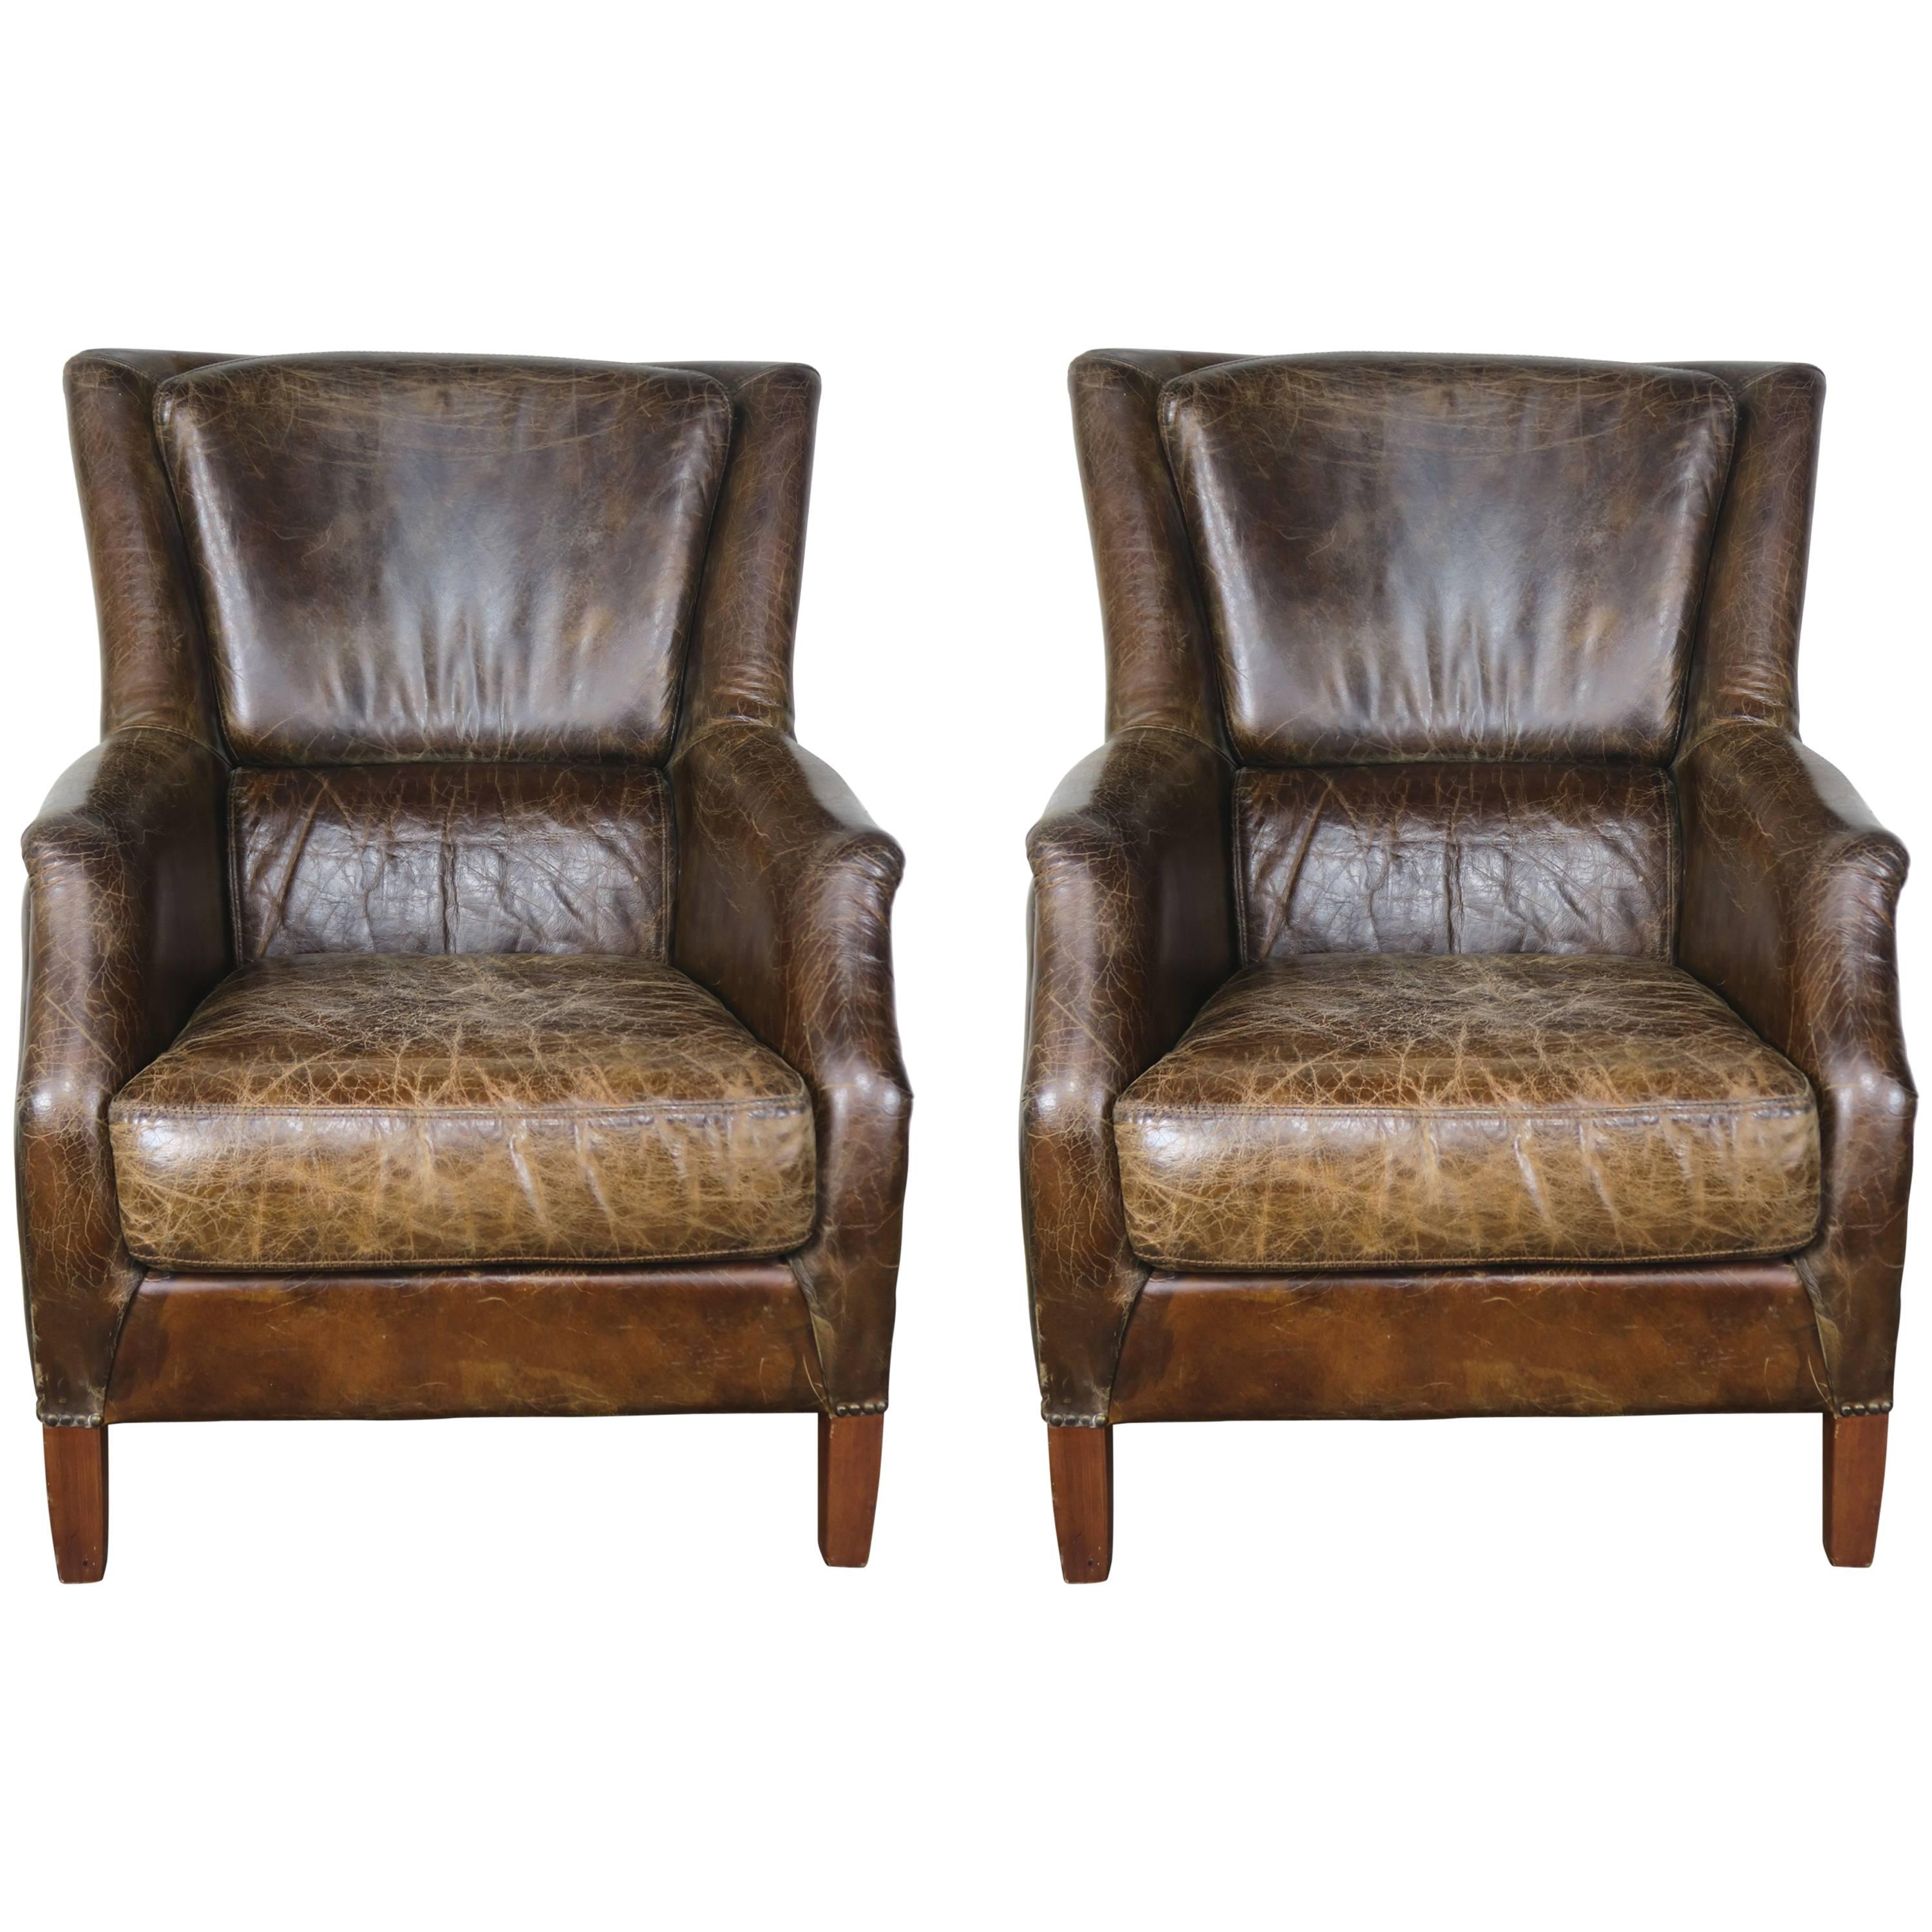 Pair of Tobacco Colored Leather Armchairs